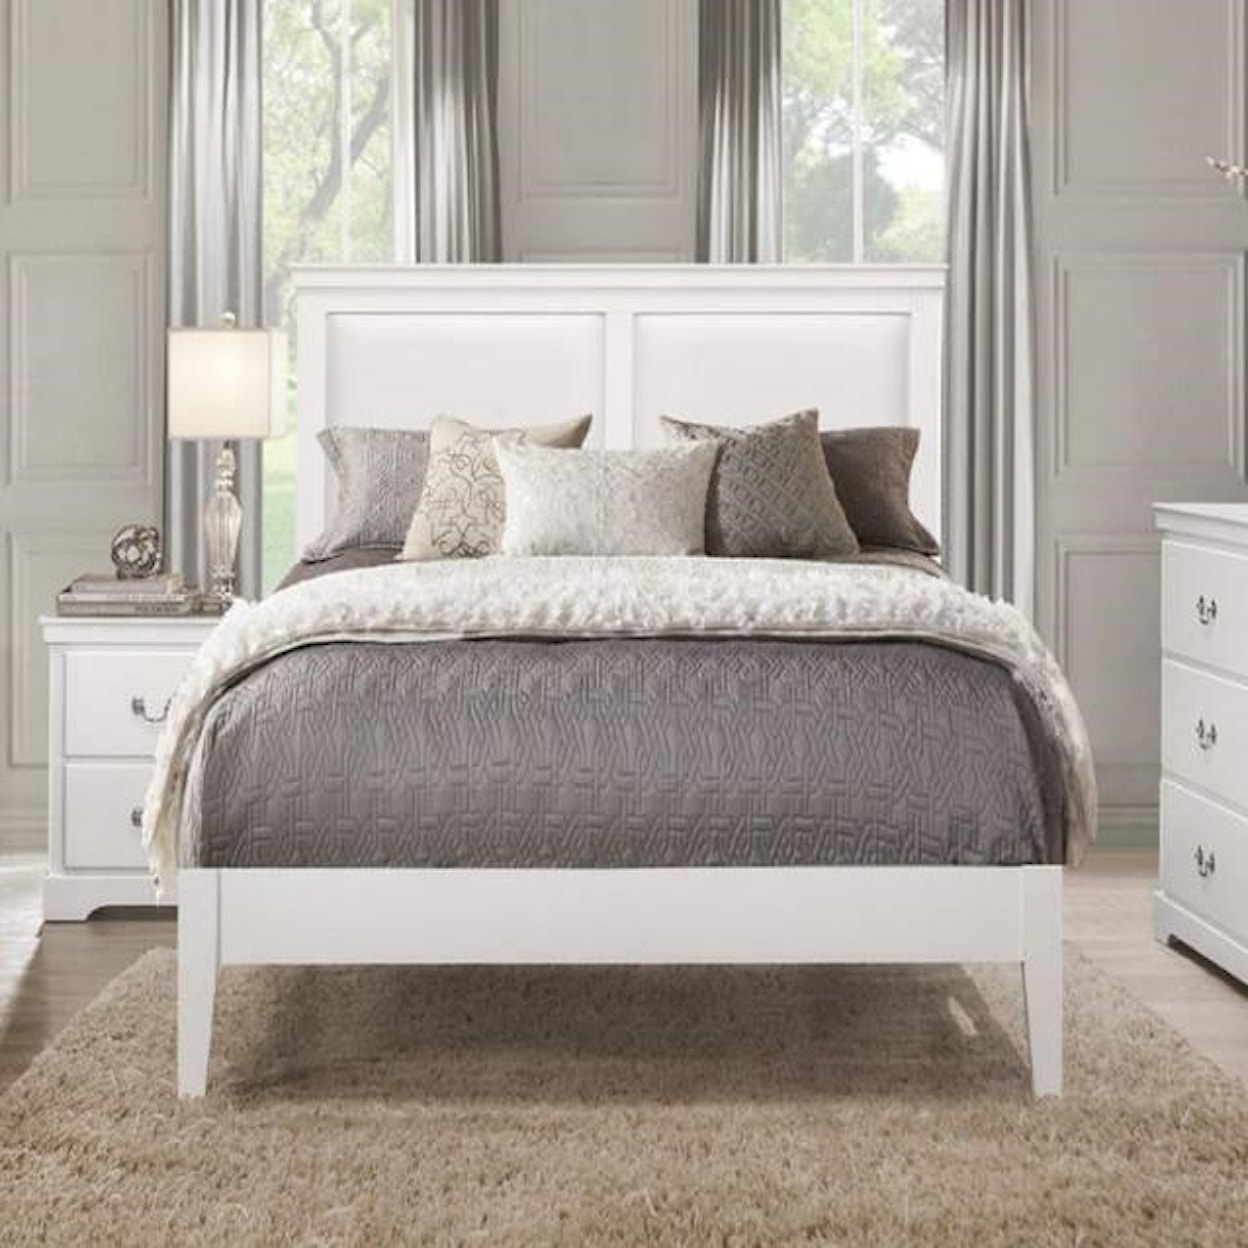 Homelegance Seabright Queen Bed